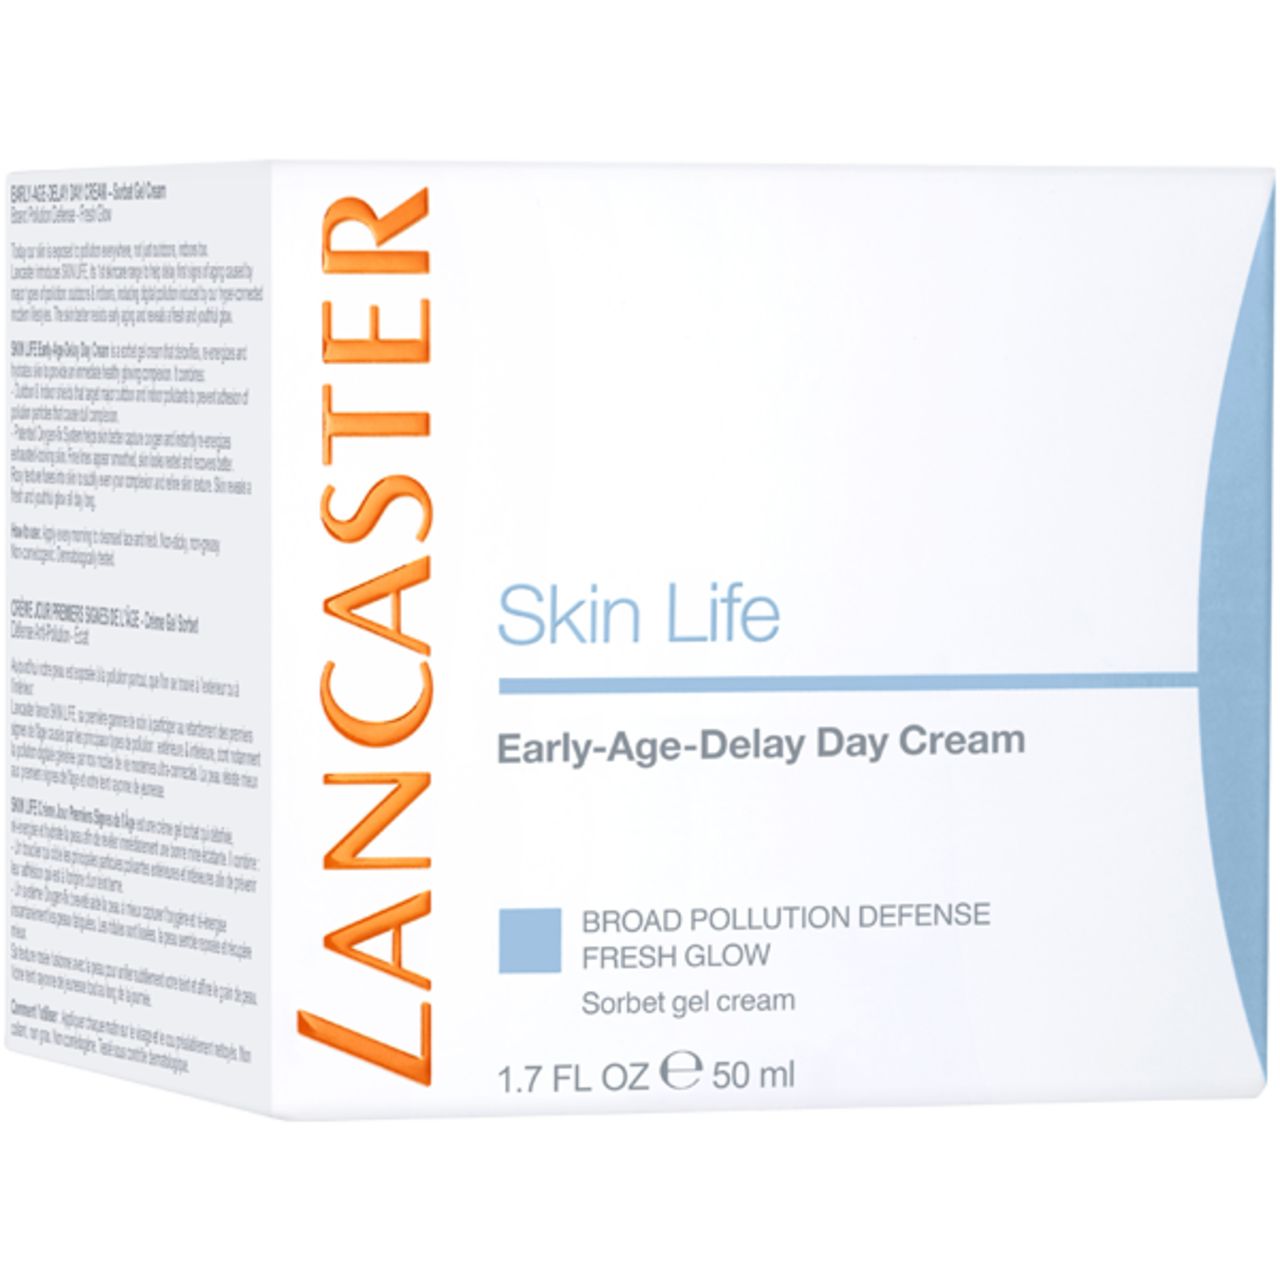 Lancaster, Skin Life Early-Age-Delay Day Cream